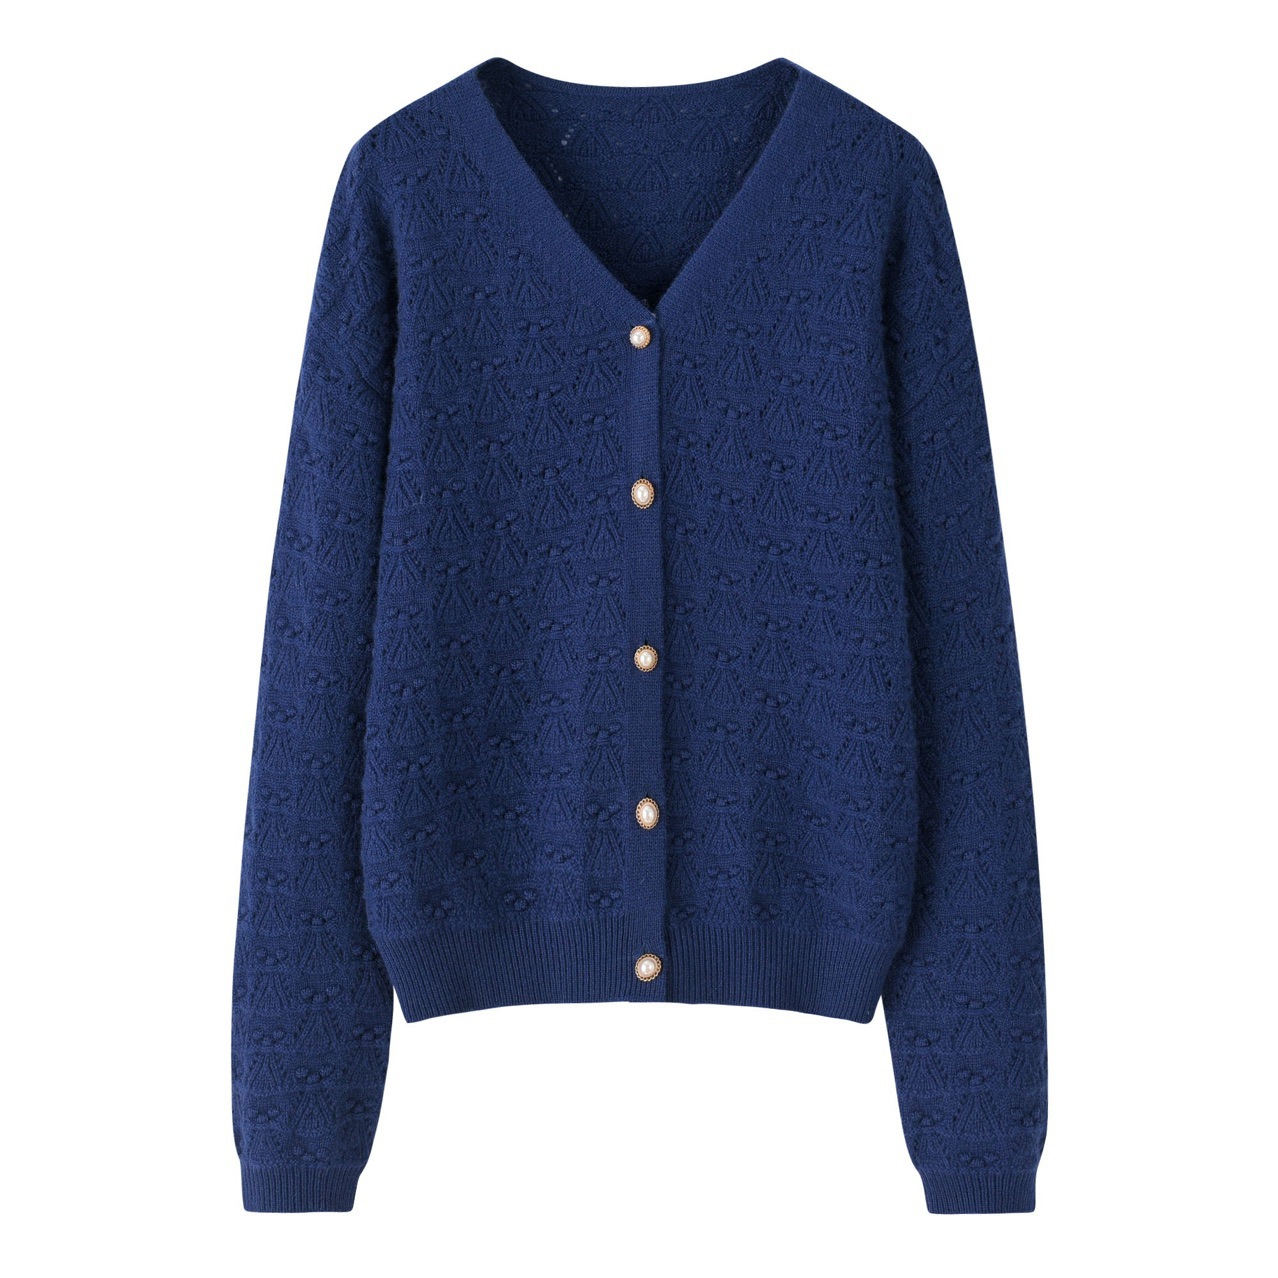 Women's V-neck Hollowed Out Cashmere Cardigan